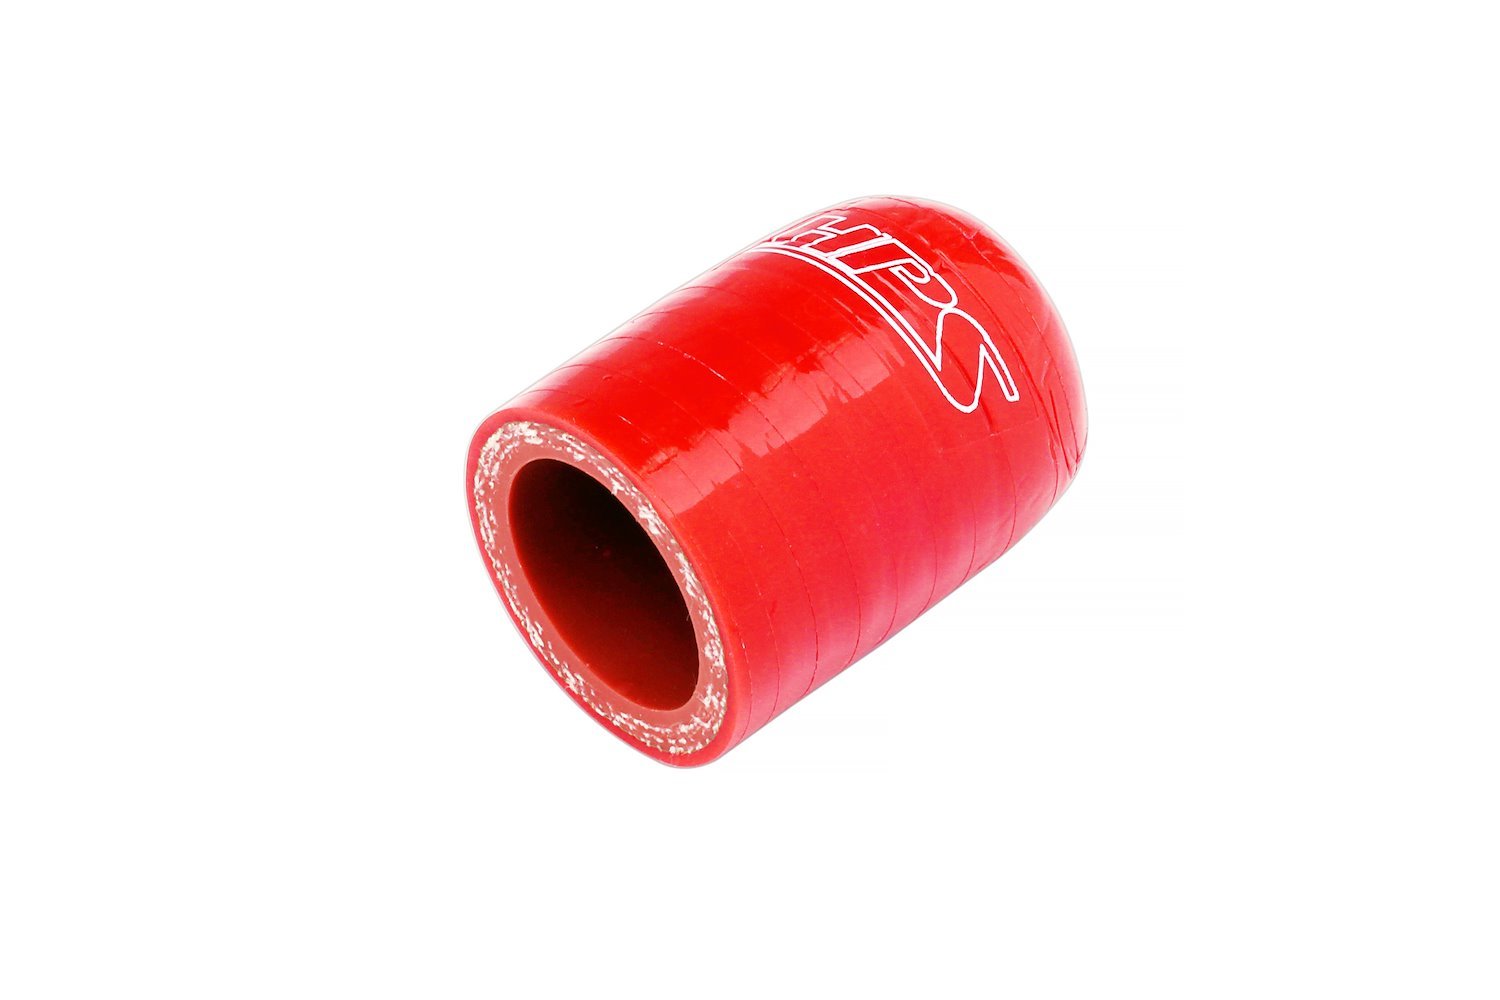 RSCC-062-RED Coolant Bypass Cap, 3-Ply Reinforced High-Temp. Silicone Bypass Cap, 5/8 in. ID, Red